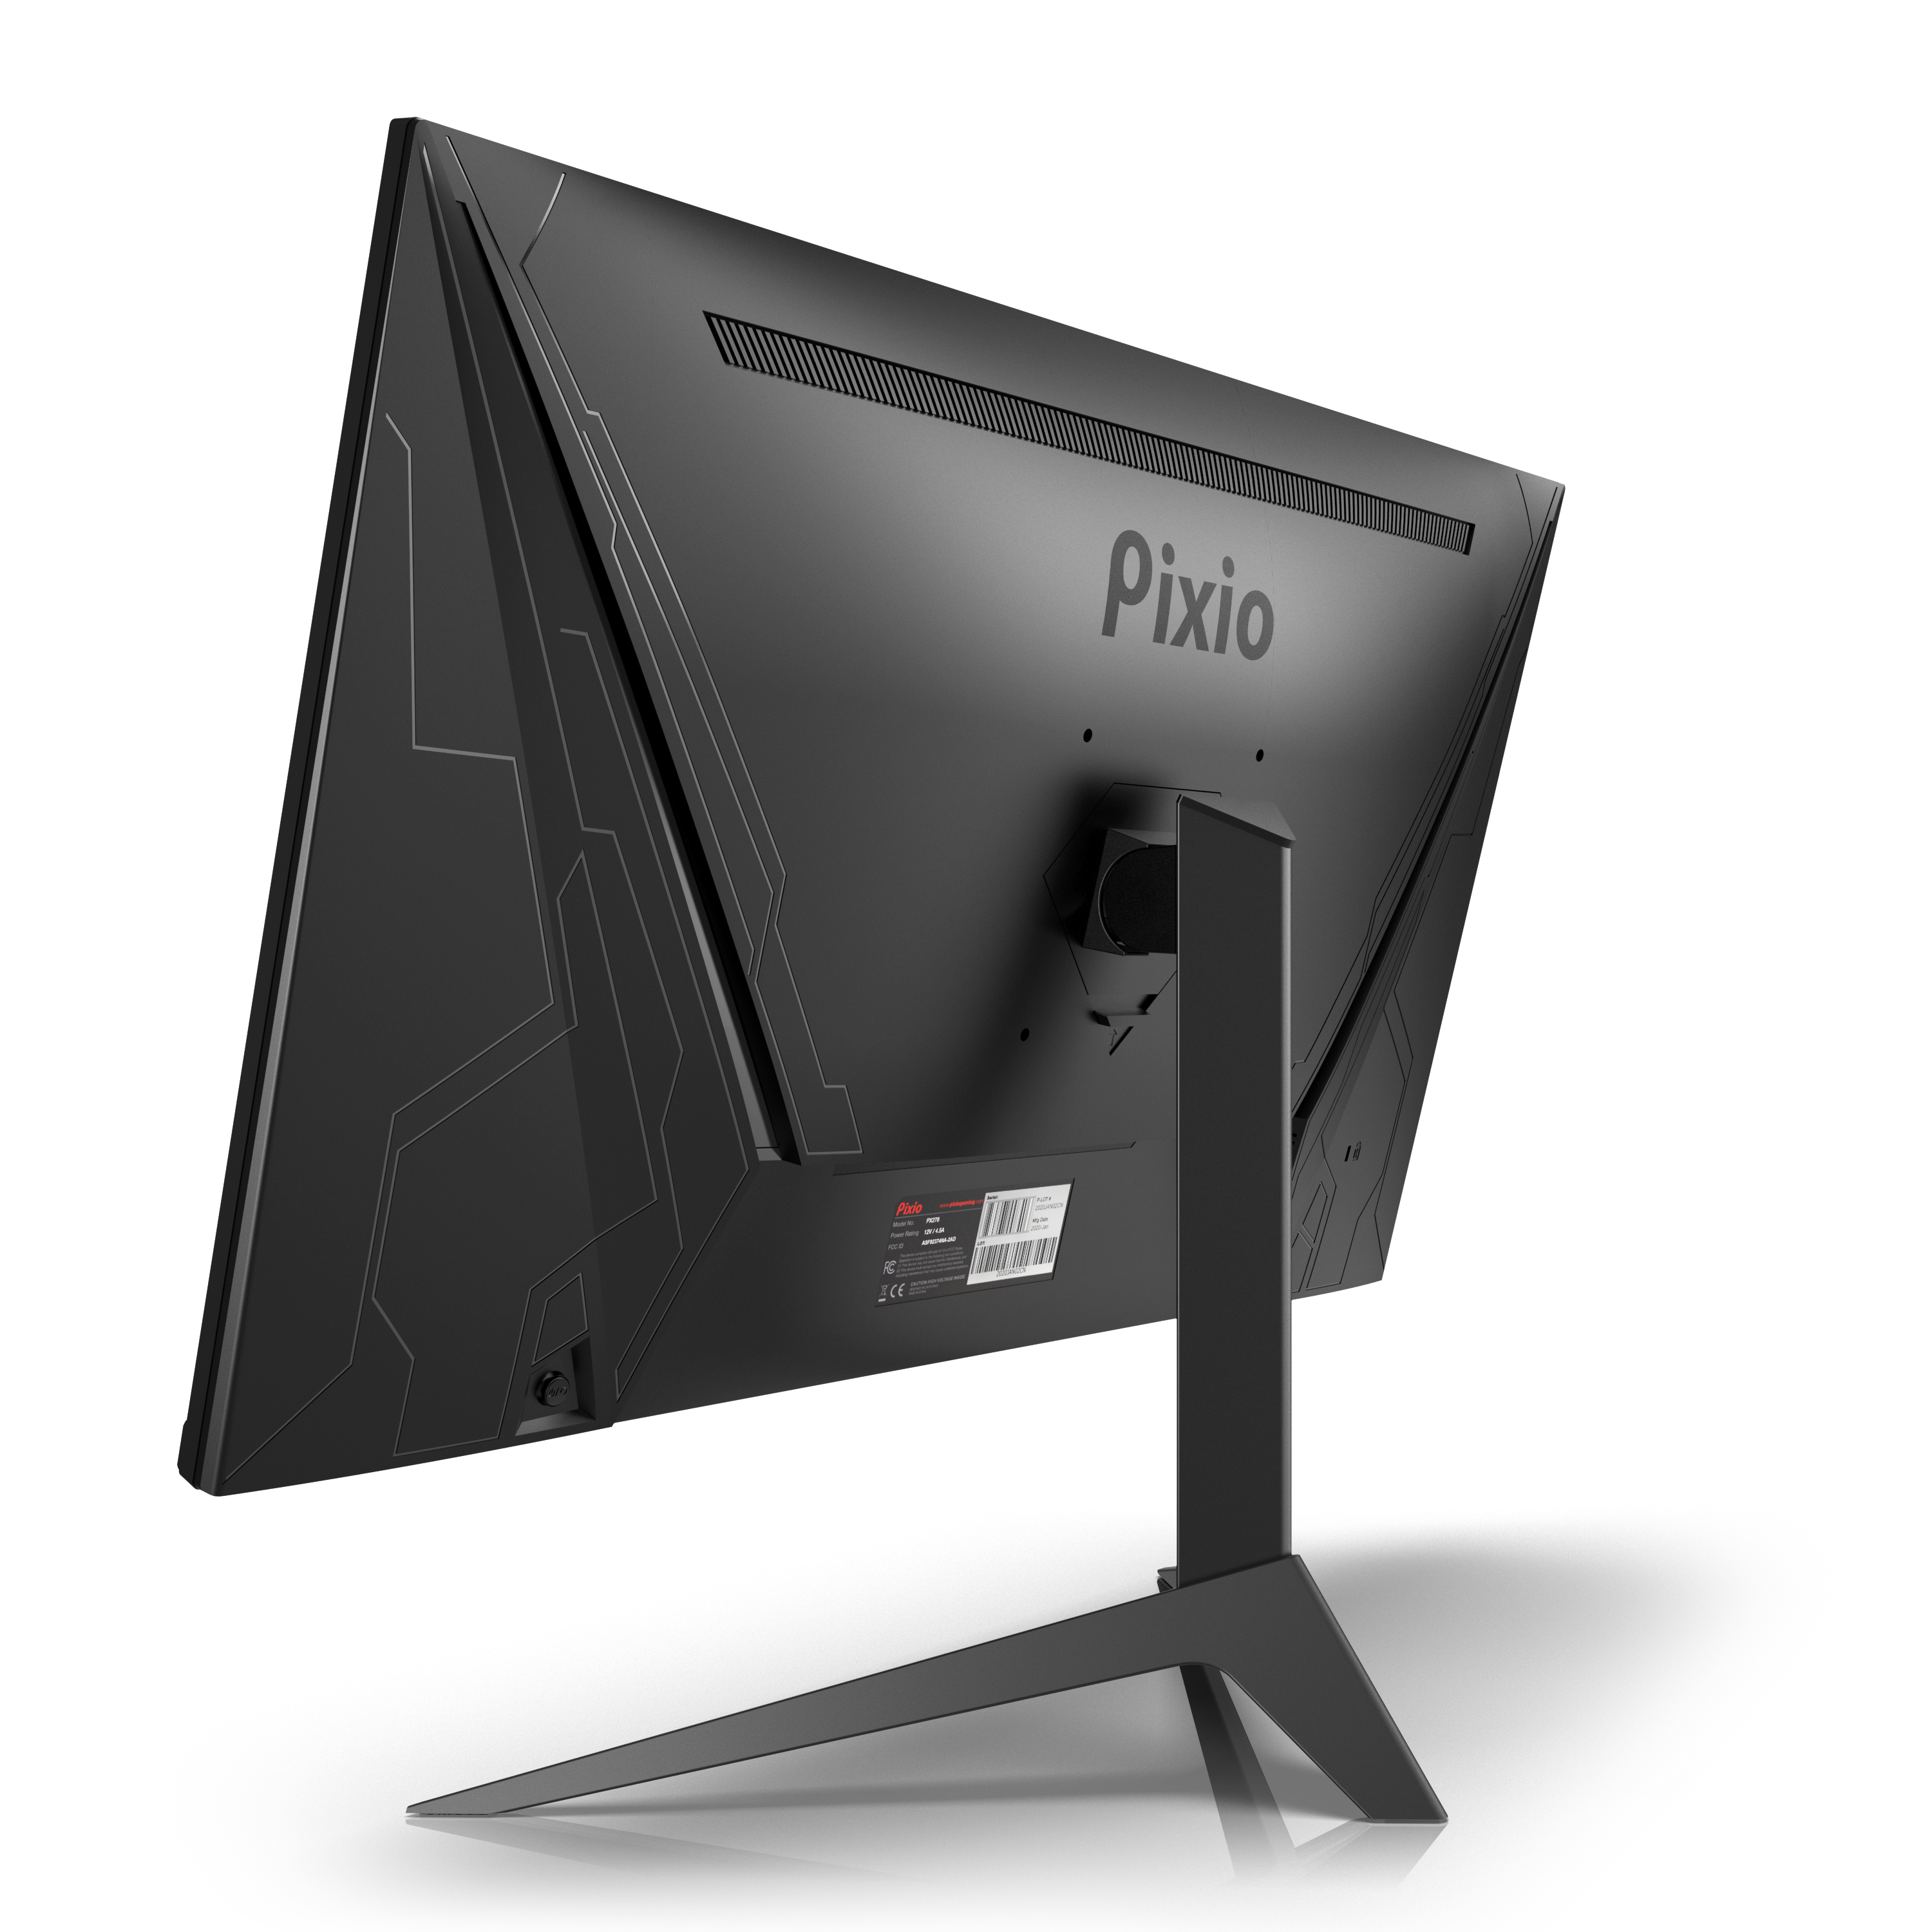 PX274 Prime Gaming Monitor